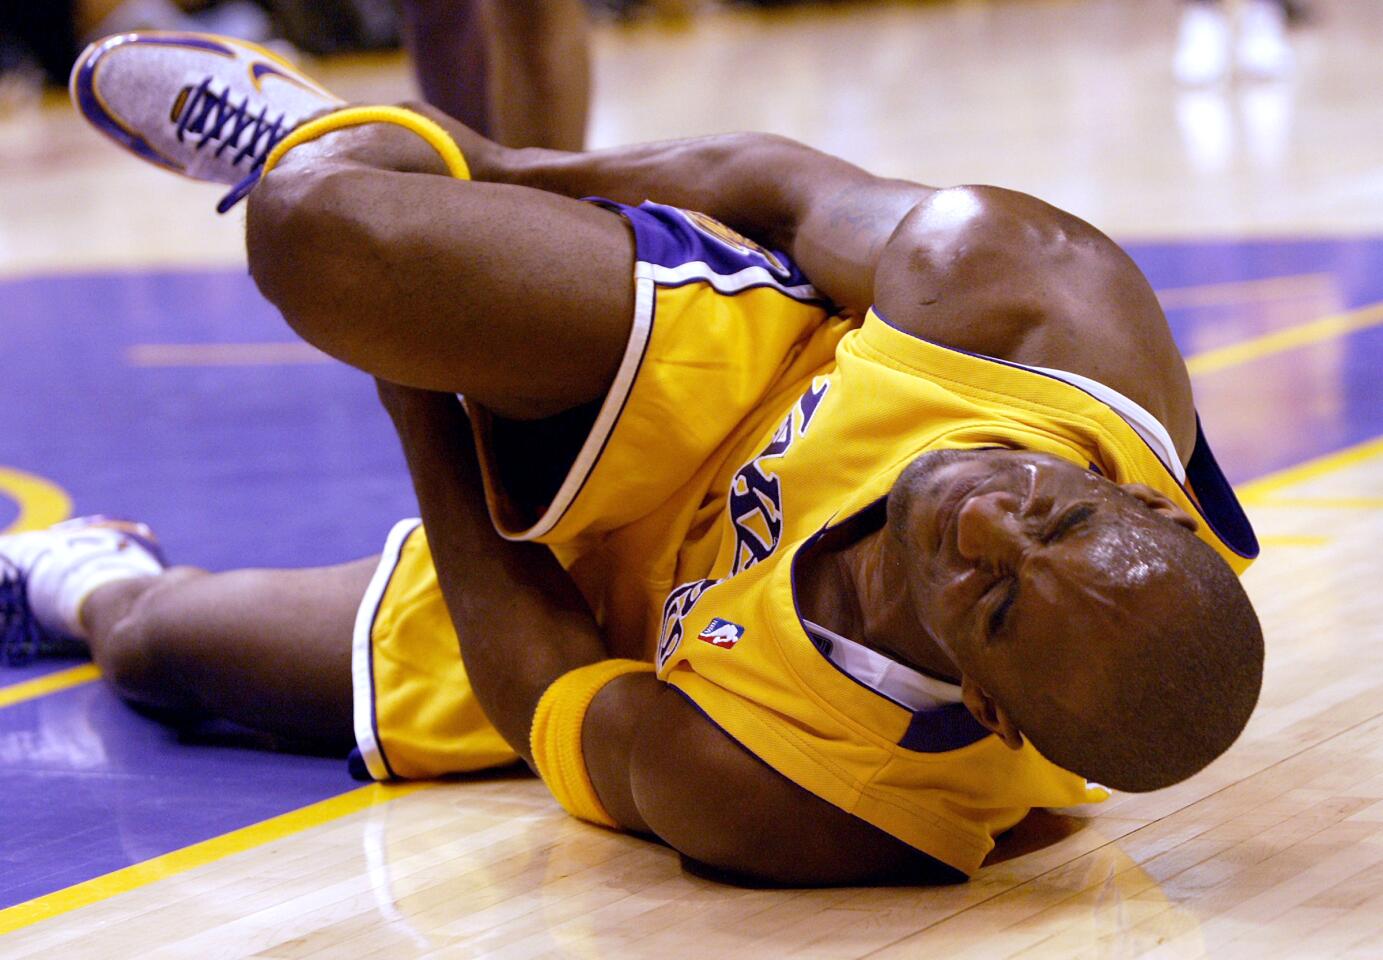 Kobe Bryant down on the court, clutching his right ankle.